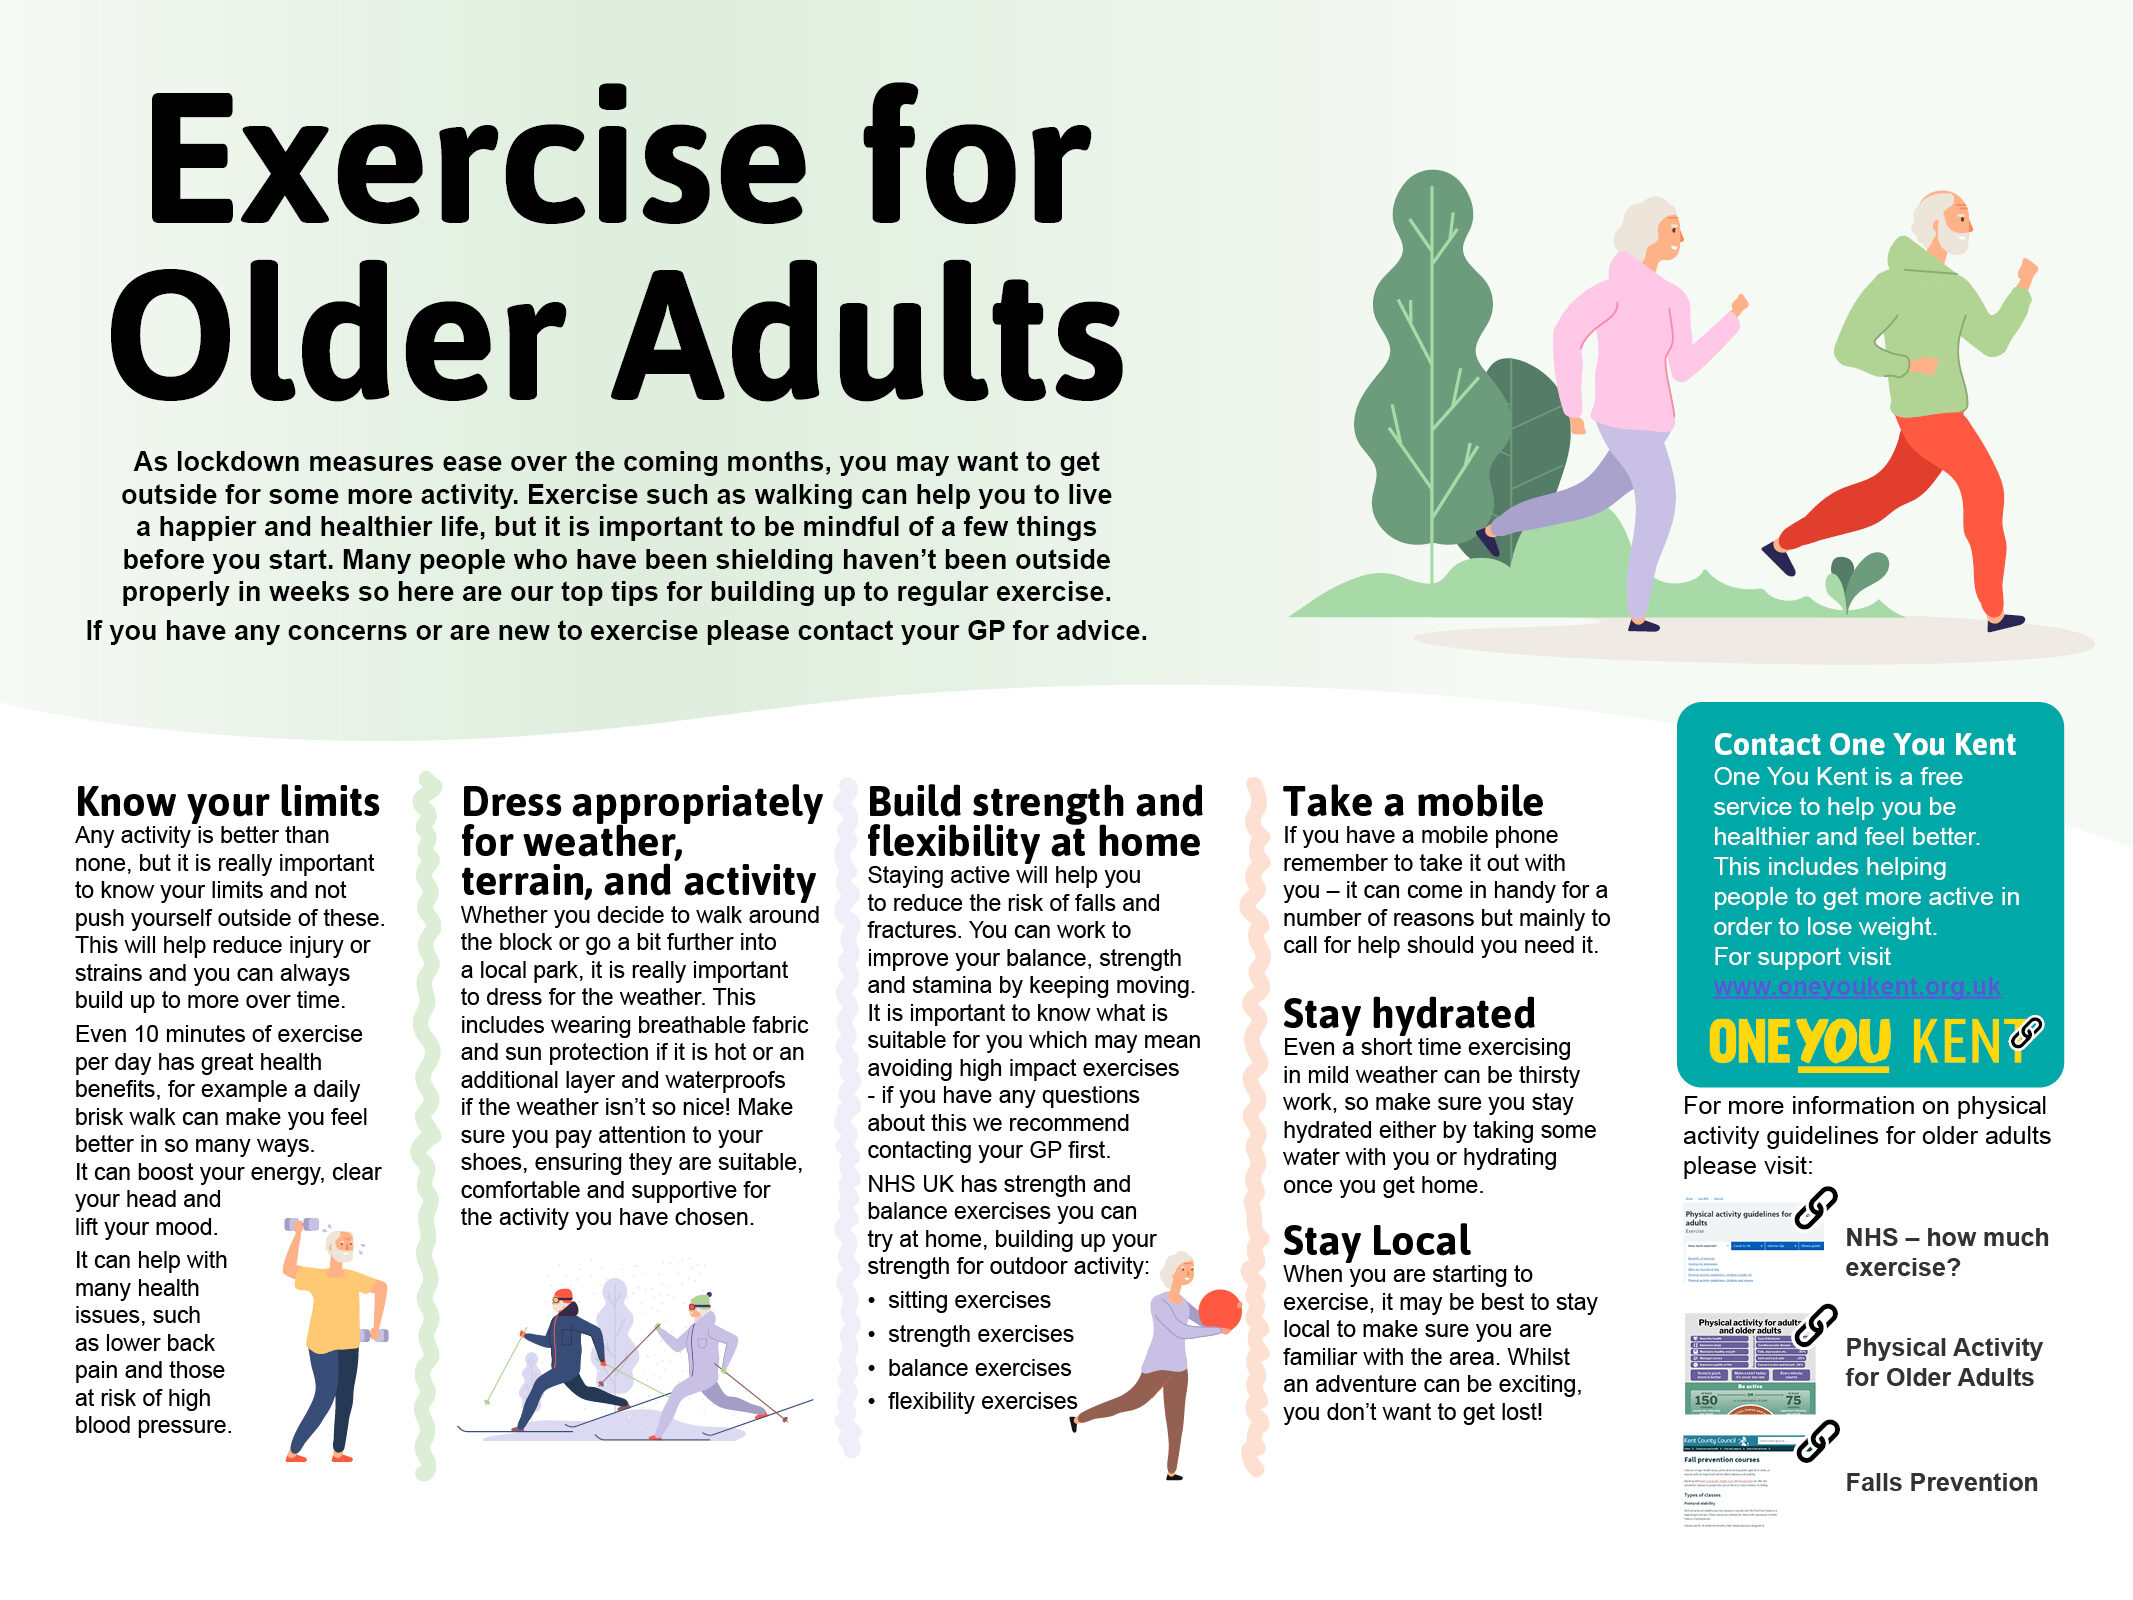 Exercise Regimes for The Senior Citizens and Ageing Adults